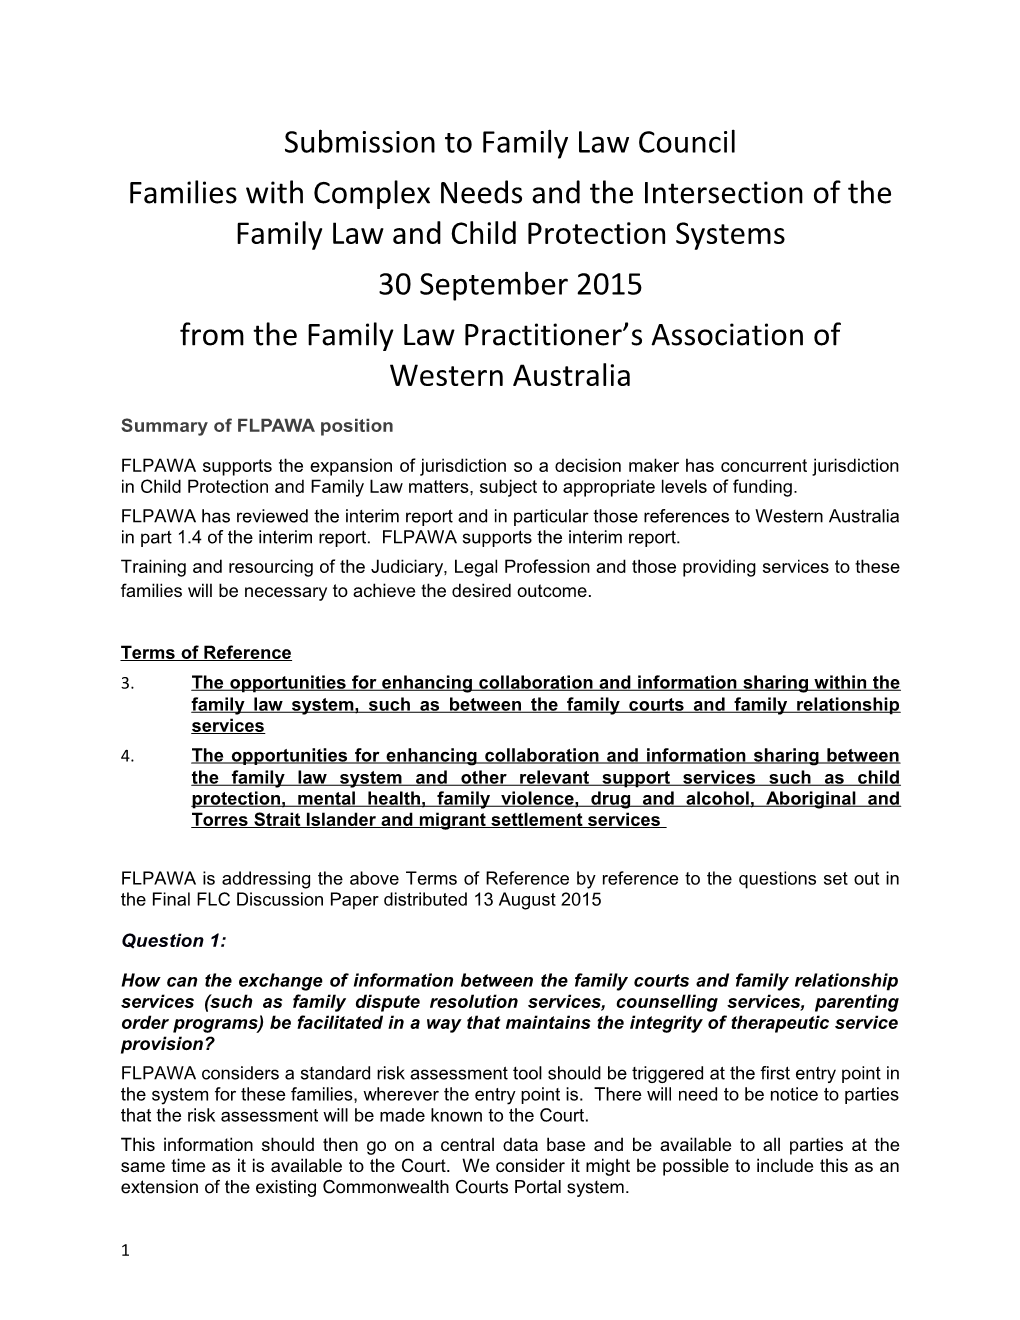 Family Law Practitioner's Association of Western Australia